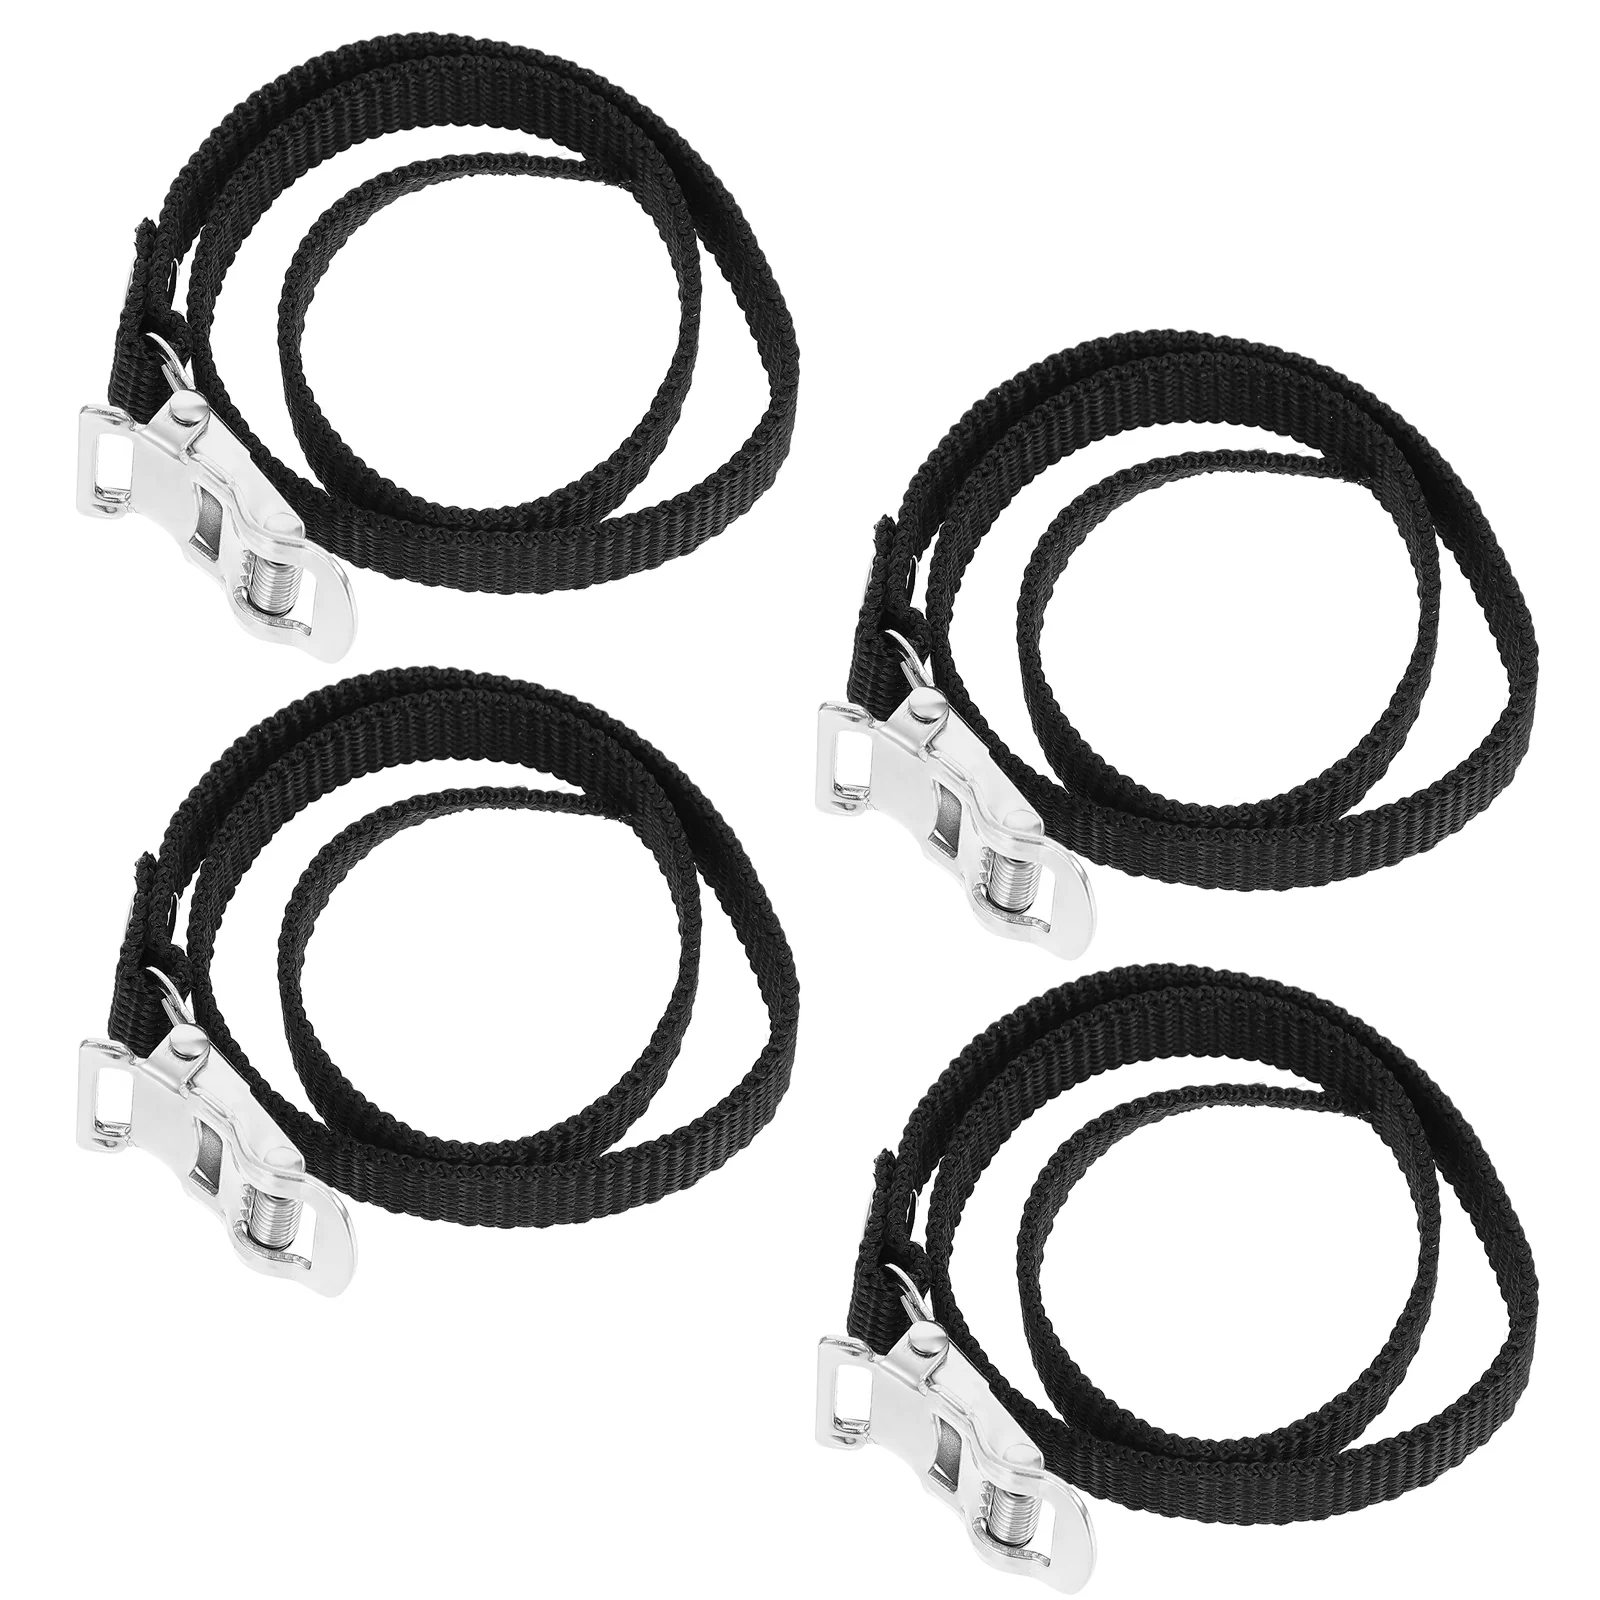 

4 Pcs Bike Strap Pedal Fix Bands Bikes Accessories Belt Riding Stationary Cycling Straps Nylon Mountain Pedals